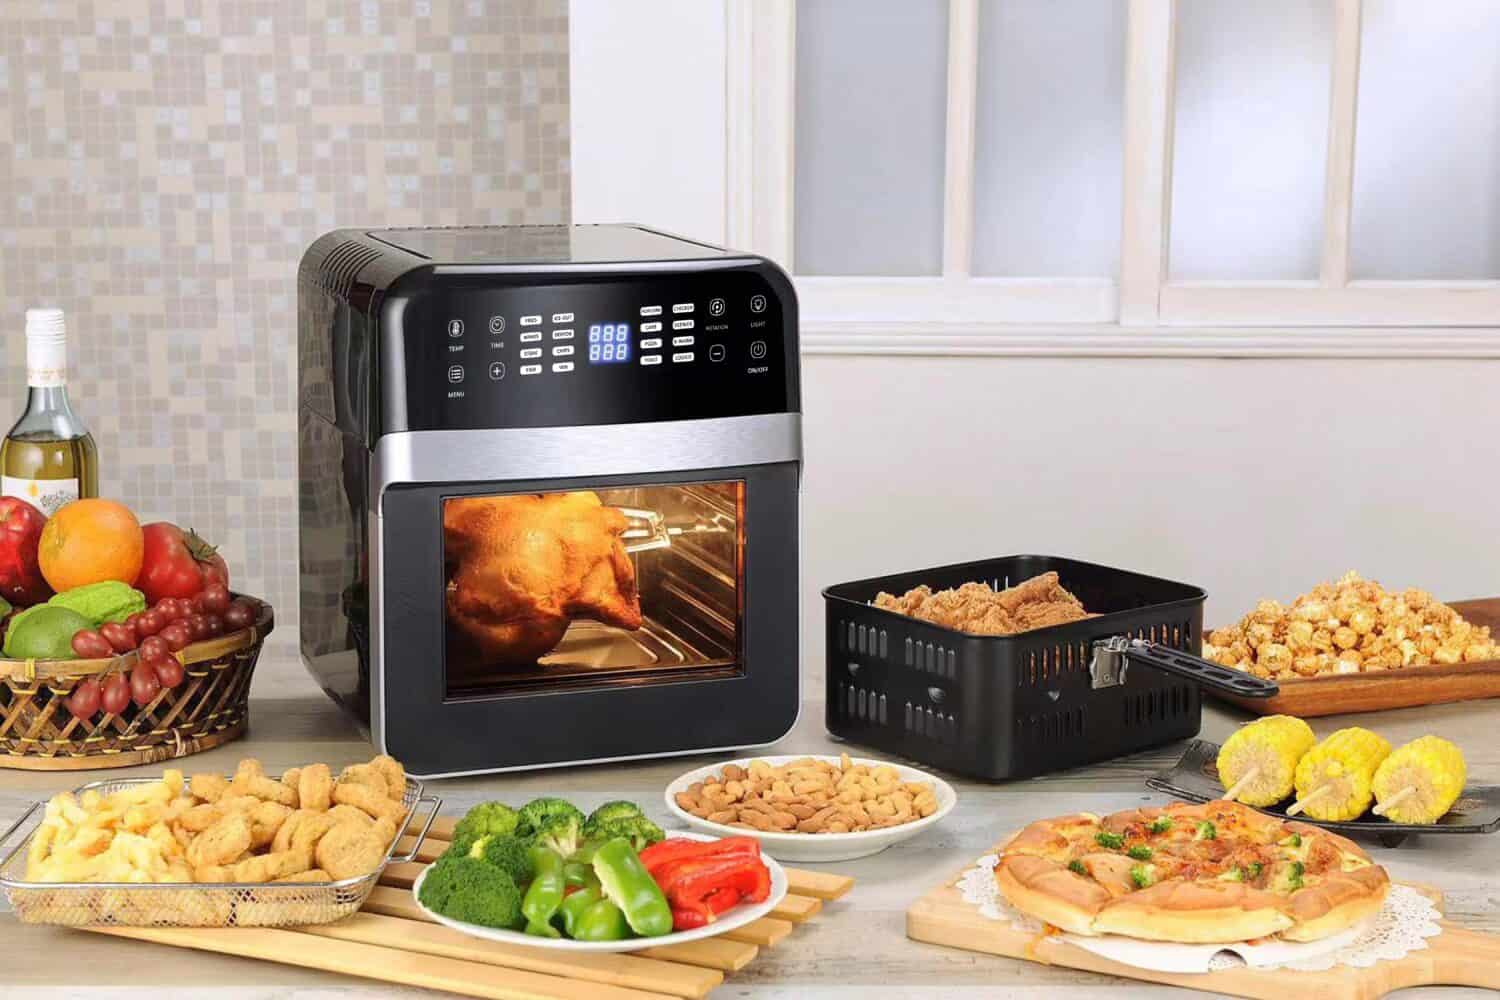 new modern ai high technology luxury beautiful electronic product design air fryer black square machine for bake cook fried skew on white background for house kitchen and restaurant